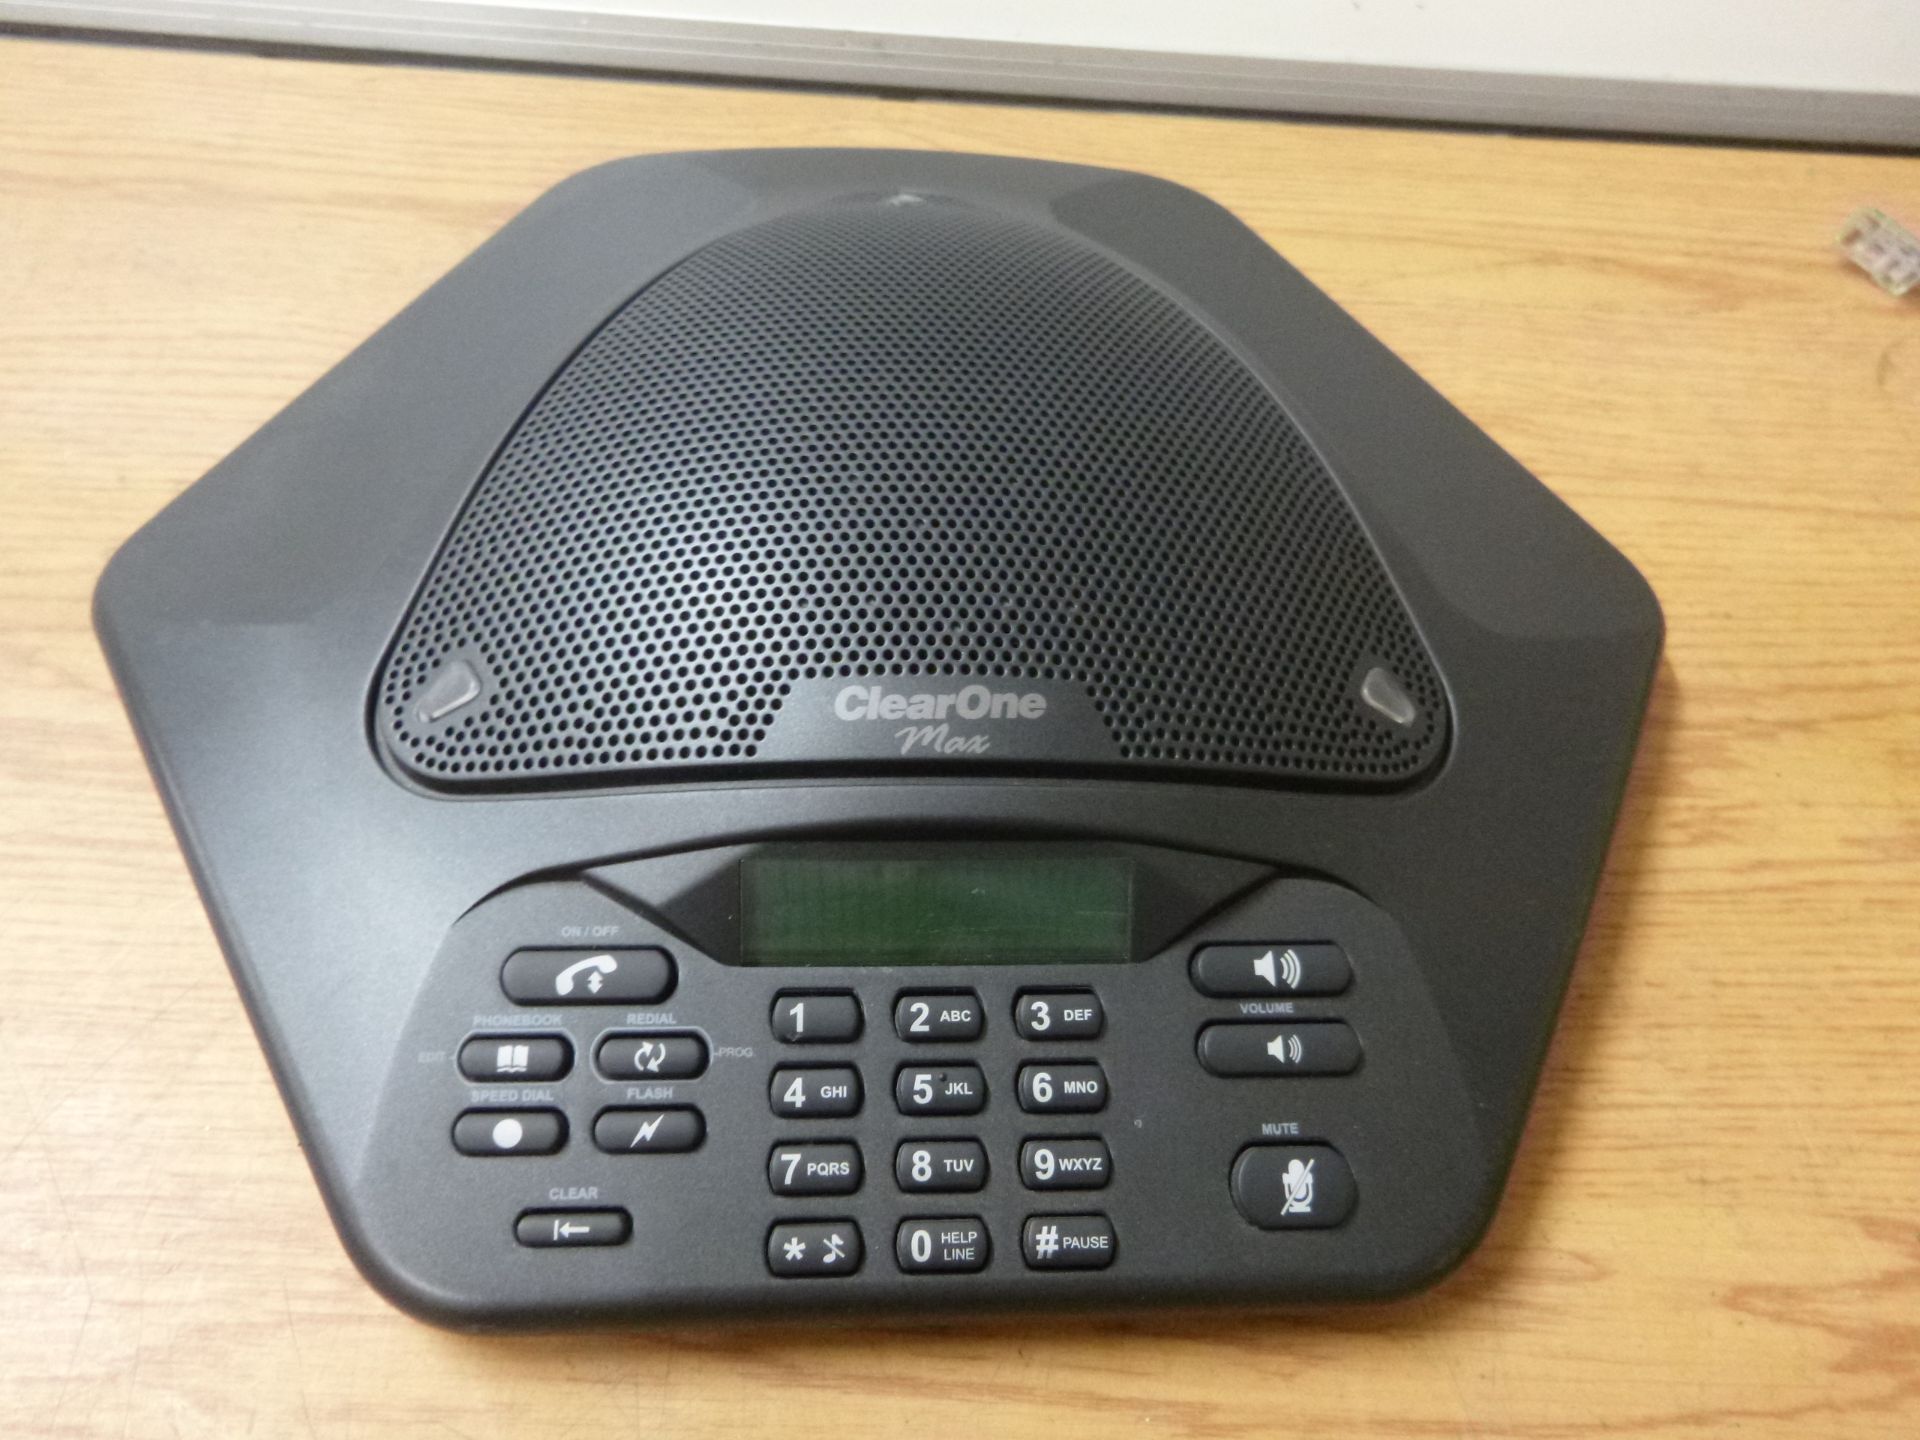 CLEAR ONE MAX WIRELESS CONFERENCE PHONE. MODEL 860-158-276 REV 4.0